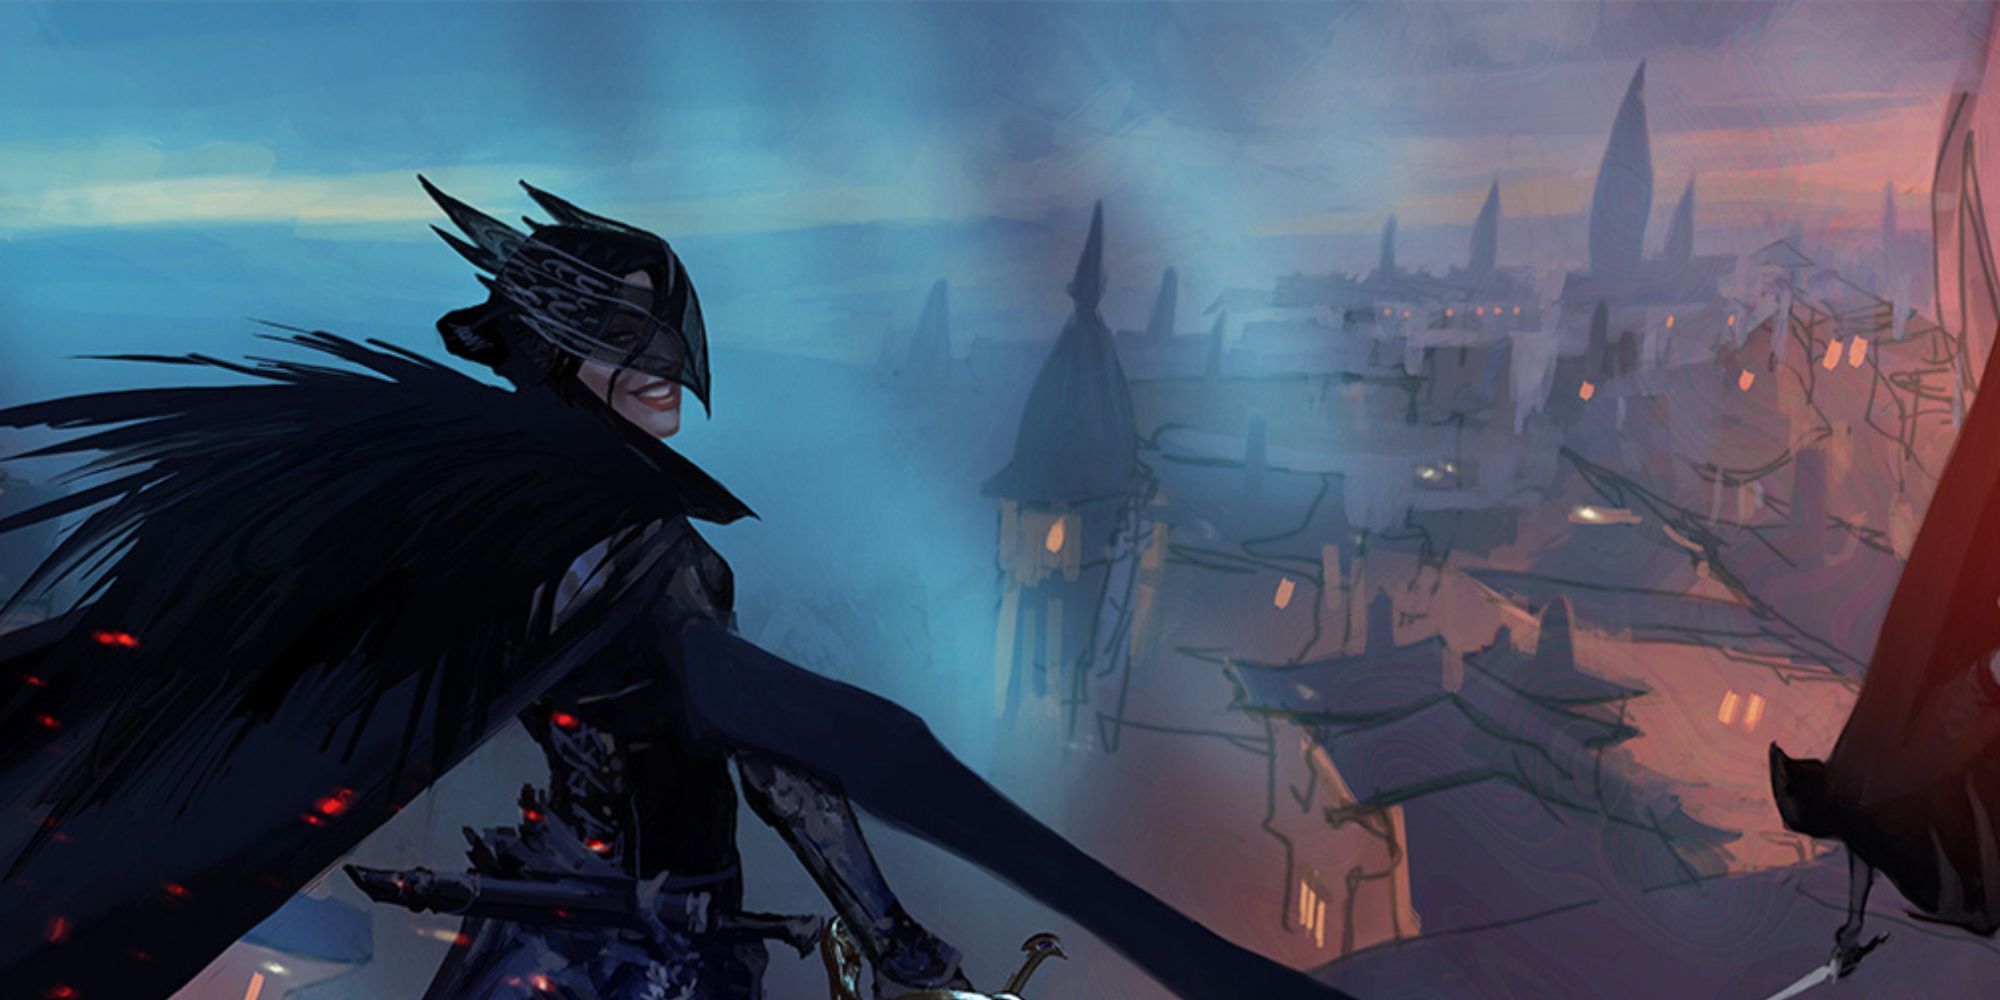 Image shows a masked figure on a rooftop overlooking a city.